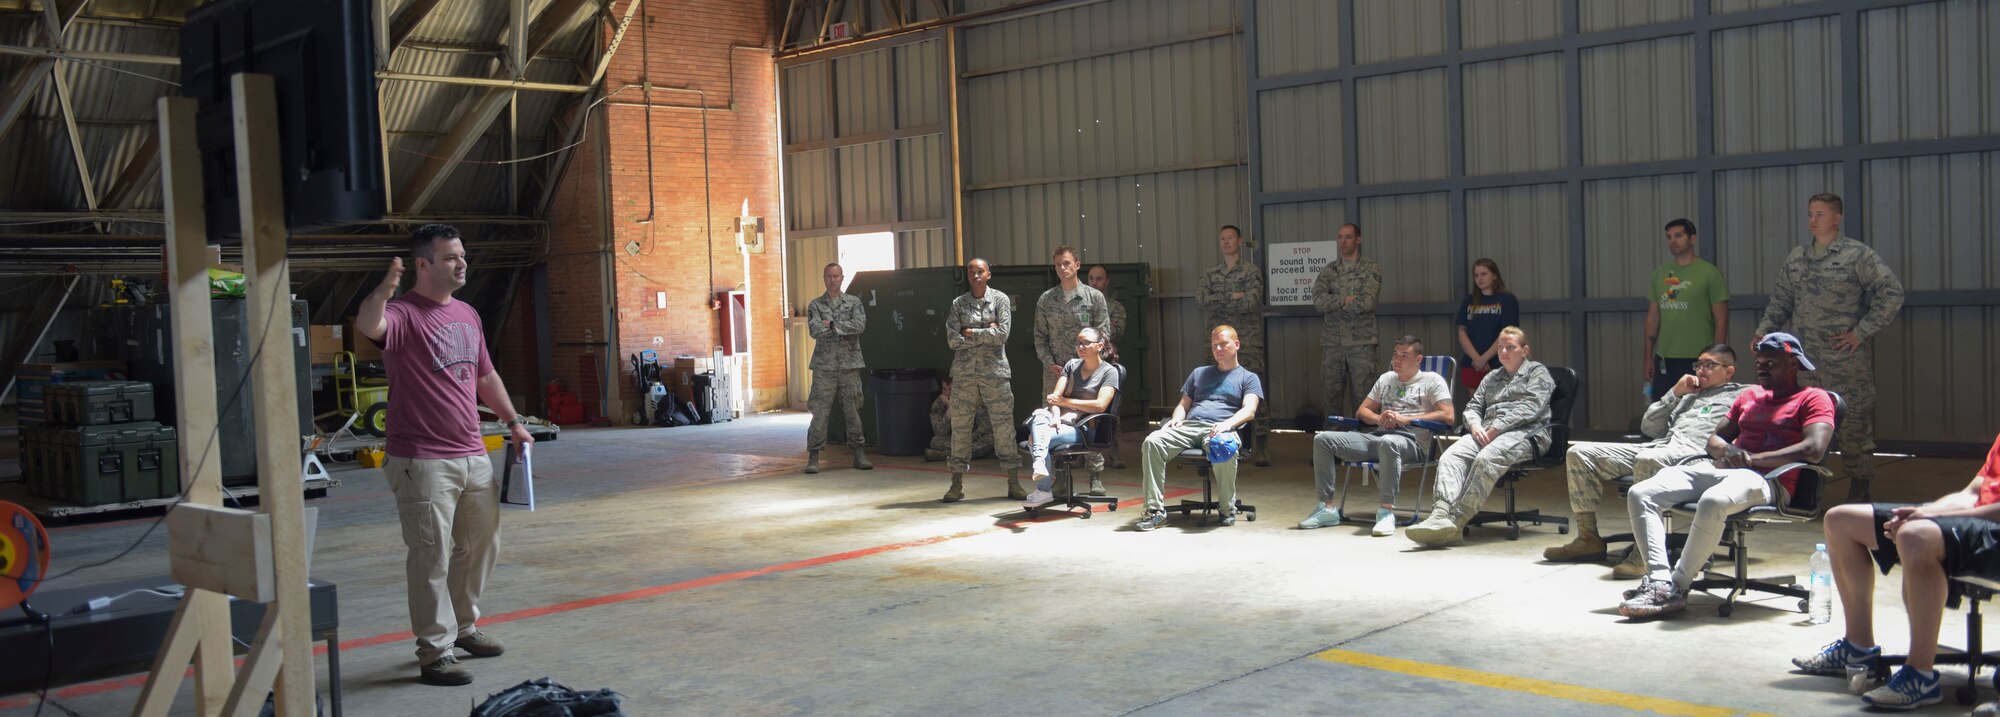 U.S. Air Force Airmen deployed with the 351st Expeditionary Air Refueling Squadron sit in a resiliency training class at Zaragoza, Spain, May 24, 2018. The ‘Balance your Thinking’ class was the first resiliency training for the 351st EARS during this deployment, and the tools are a key part to keeping Airmen happy and healthy. (U.S. Air Force photo by Airman 1st Class Alexandria Lee)